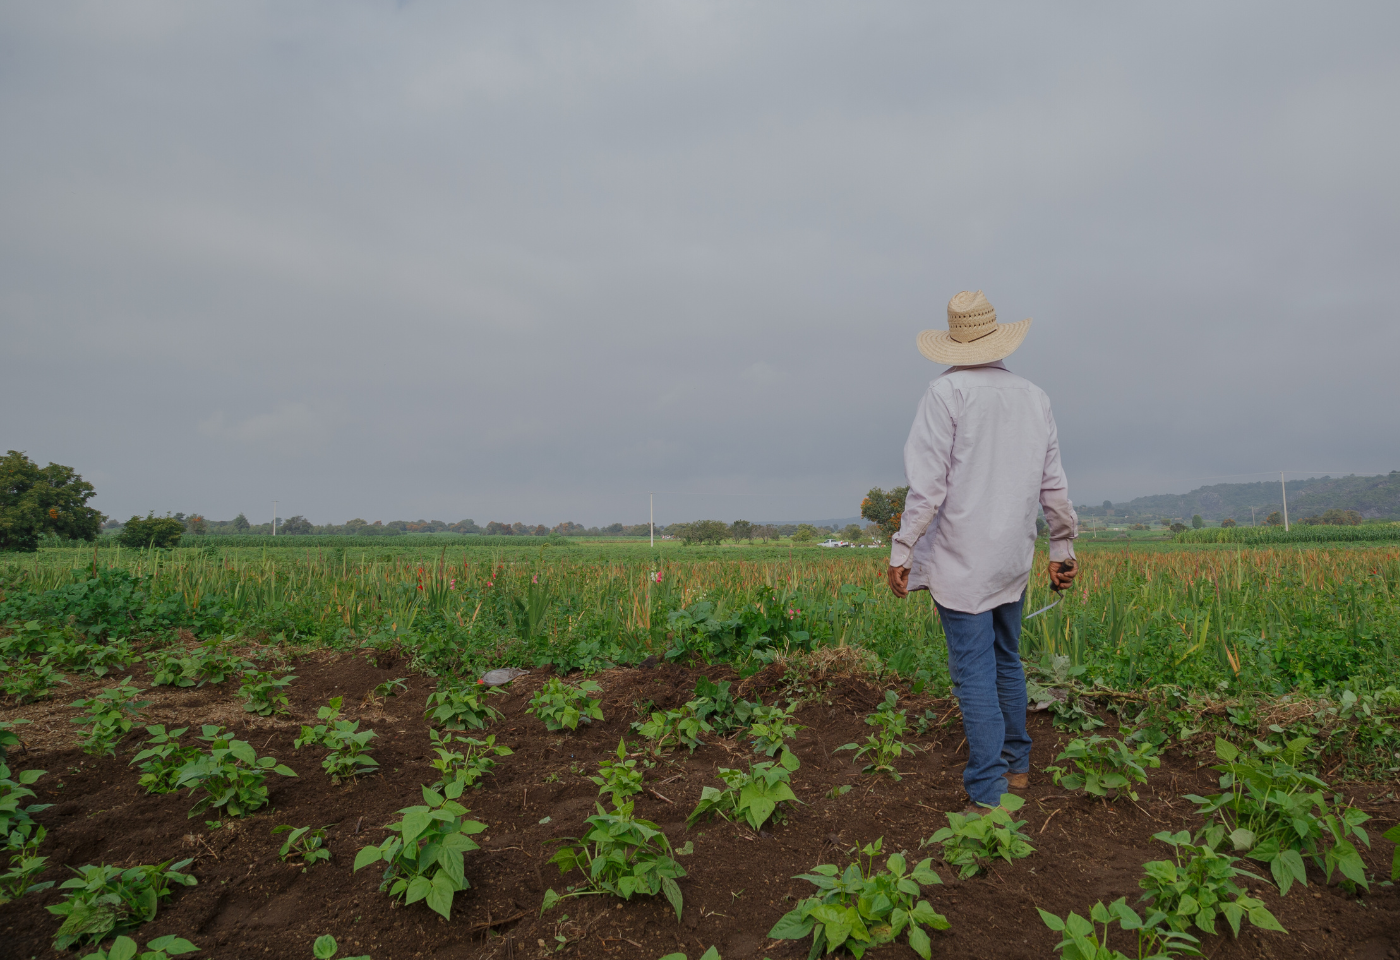 Farmworker in a field with smoggy clouds in the background